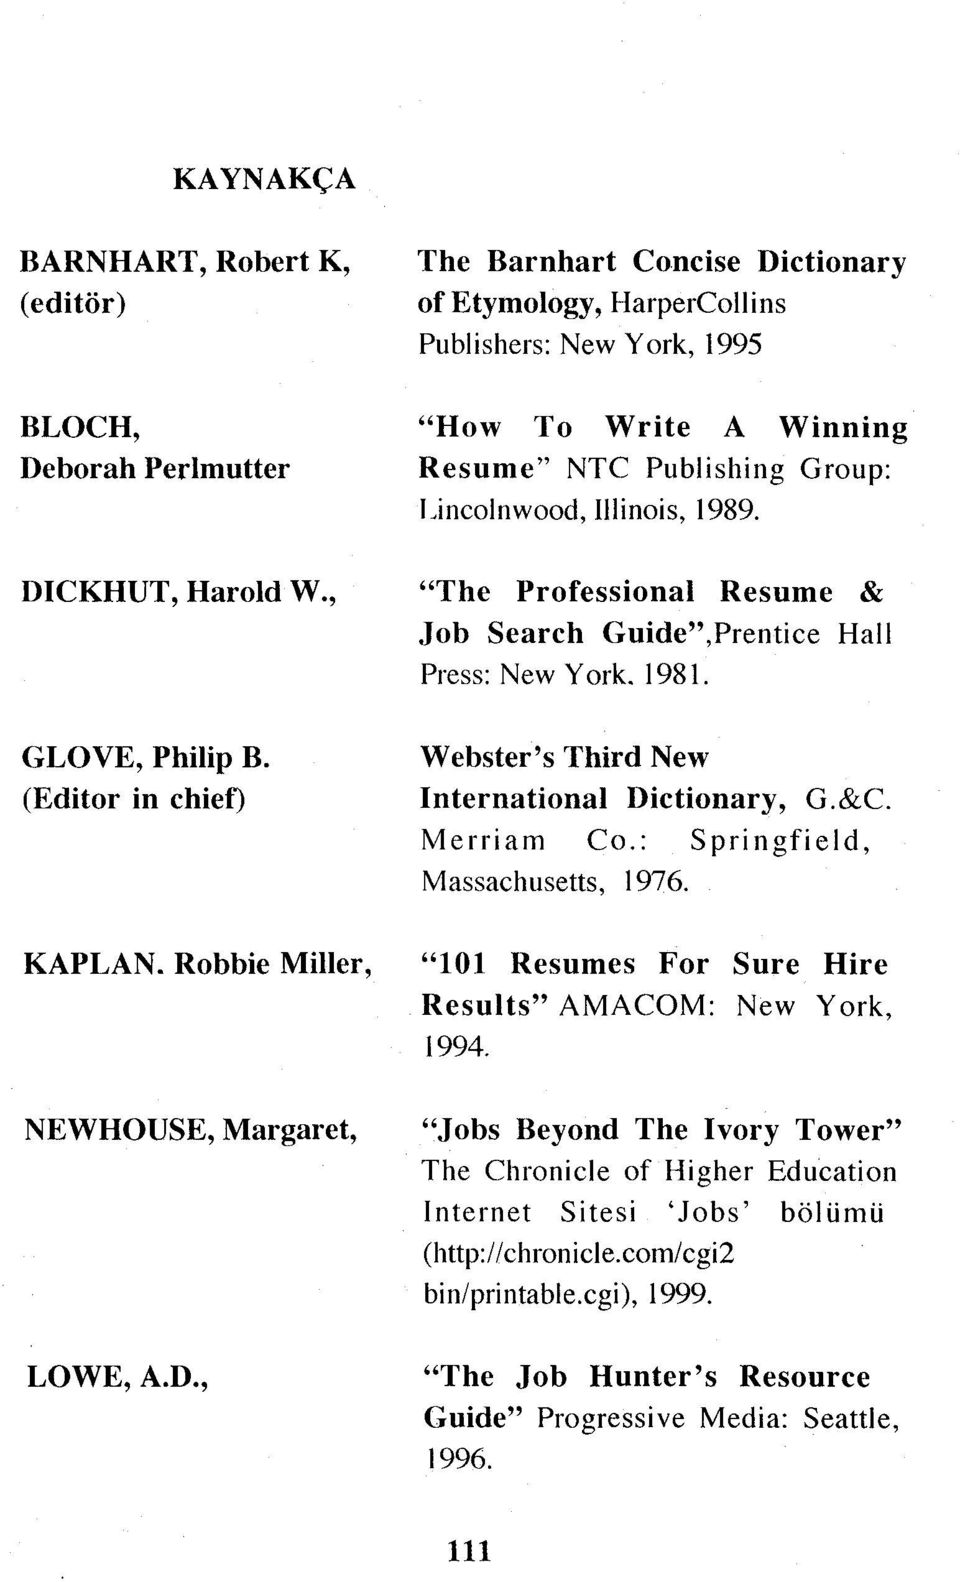 "The Professional Resume & Job Search Guide",Prentice Hall Press: New Yark. 1981. Webster's Third New International Dictionary, G.&C. Merriam Co.: Springfield, Massachusetts, 1976. KAPLAN.